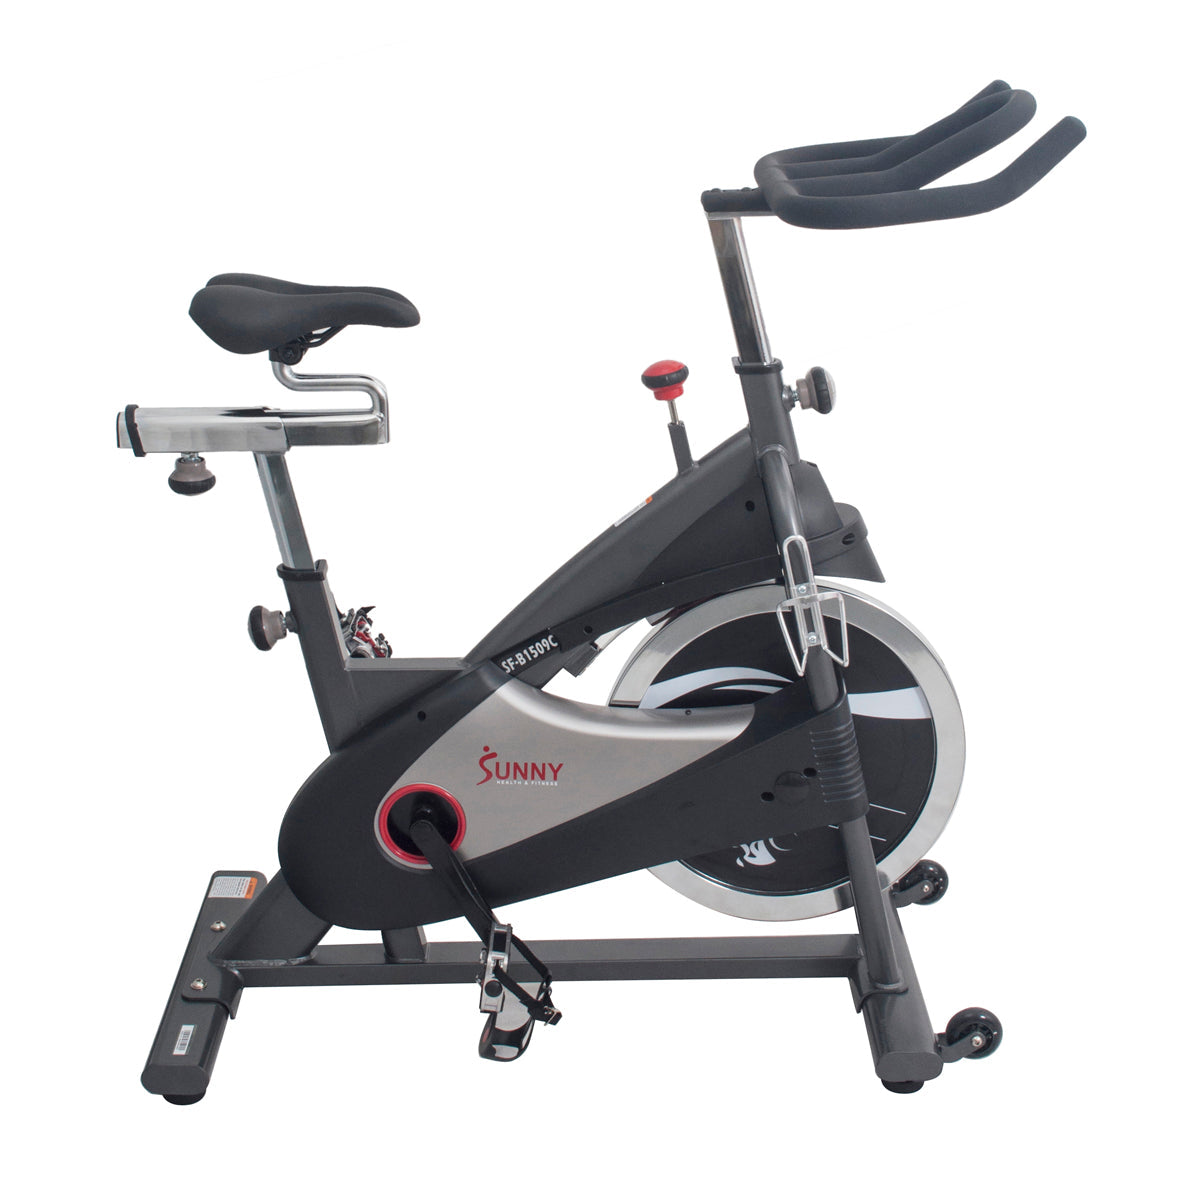 Clipless Pedal Exercise Bike Premium Chain Drive Indoor Cycling